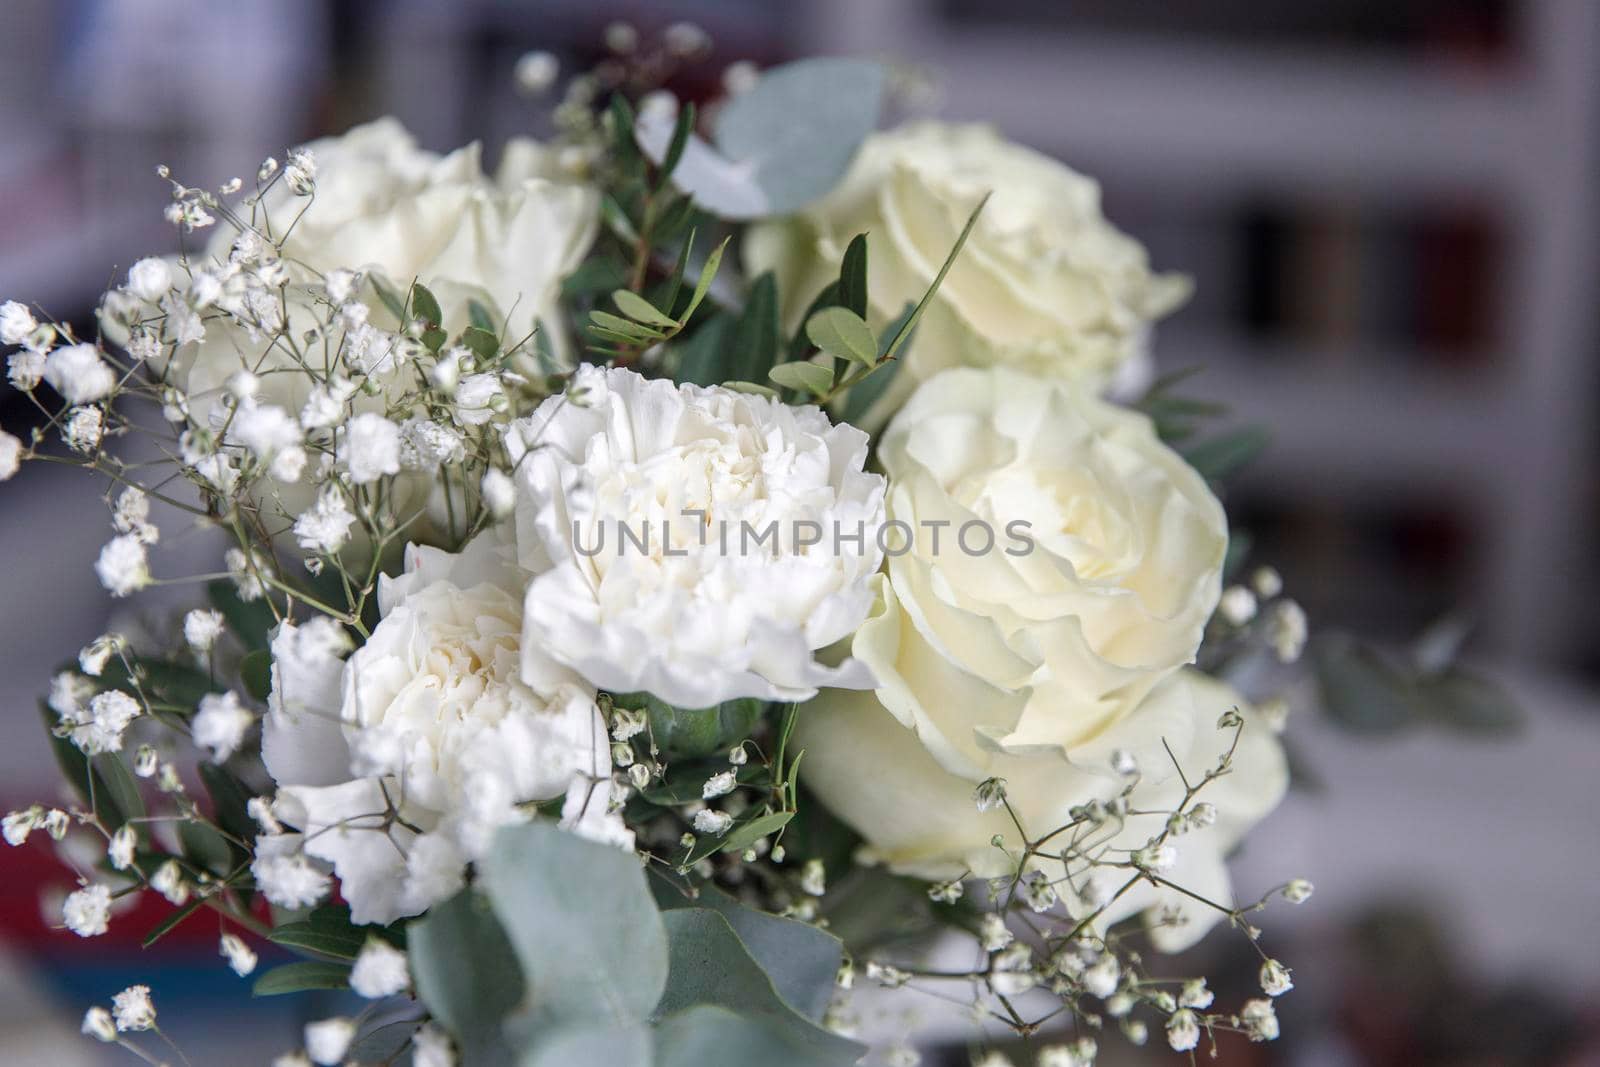 White roses, terry carnations, lisianthus, gypsophila and eucalyptus are in the bride's wedding bouquet by elenarostunova